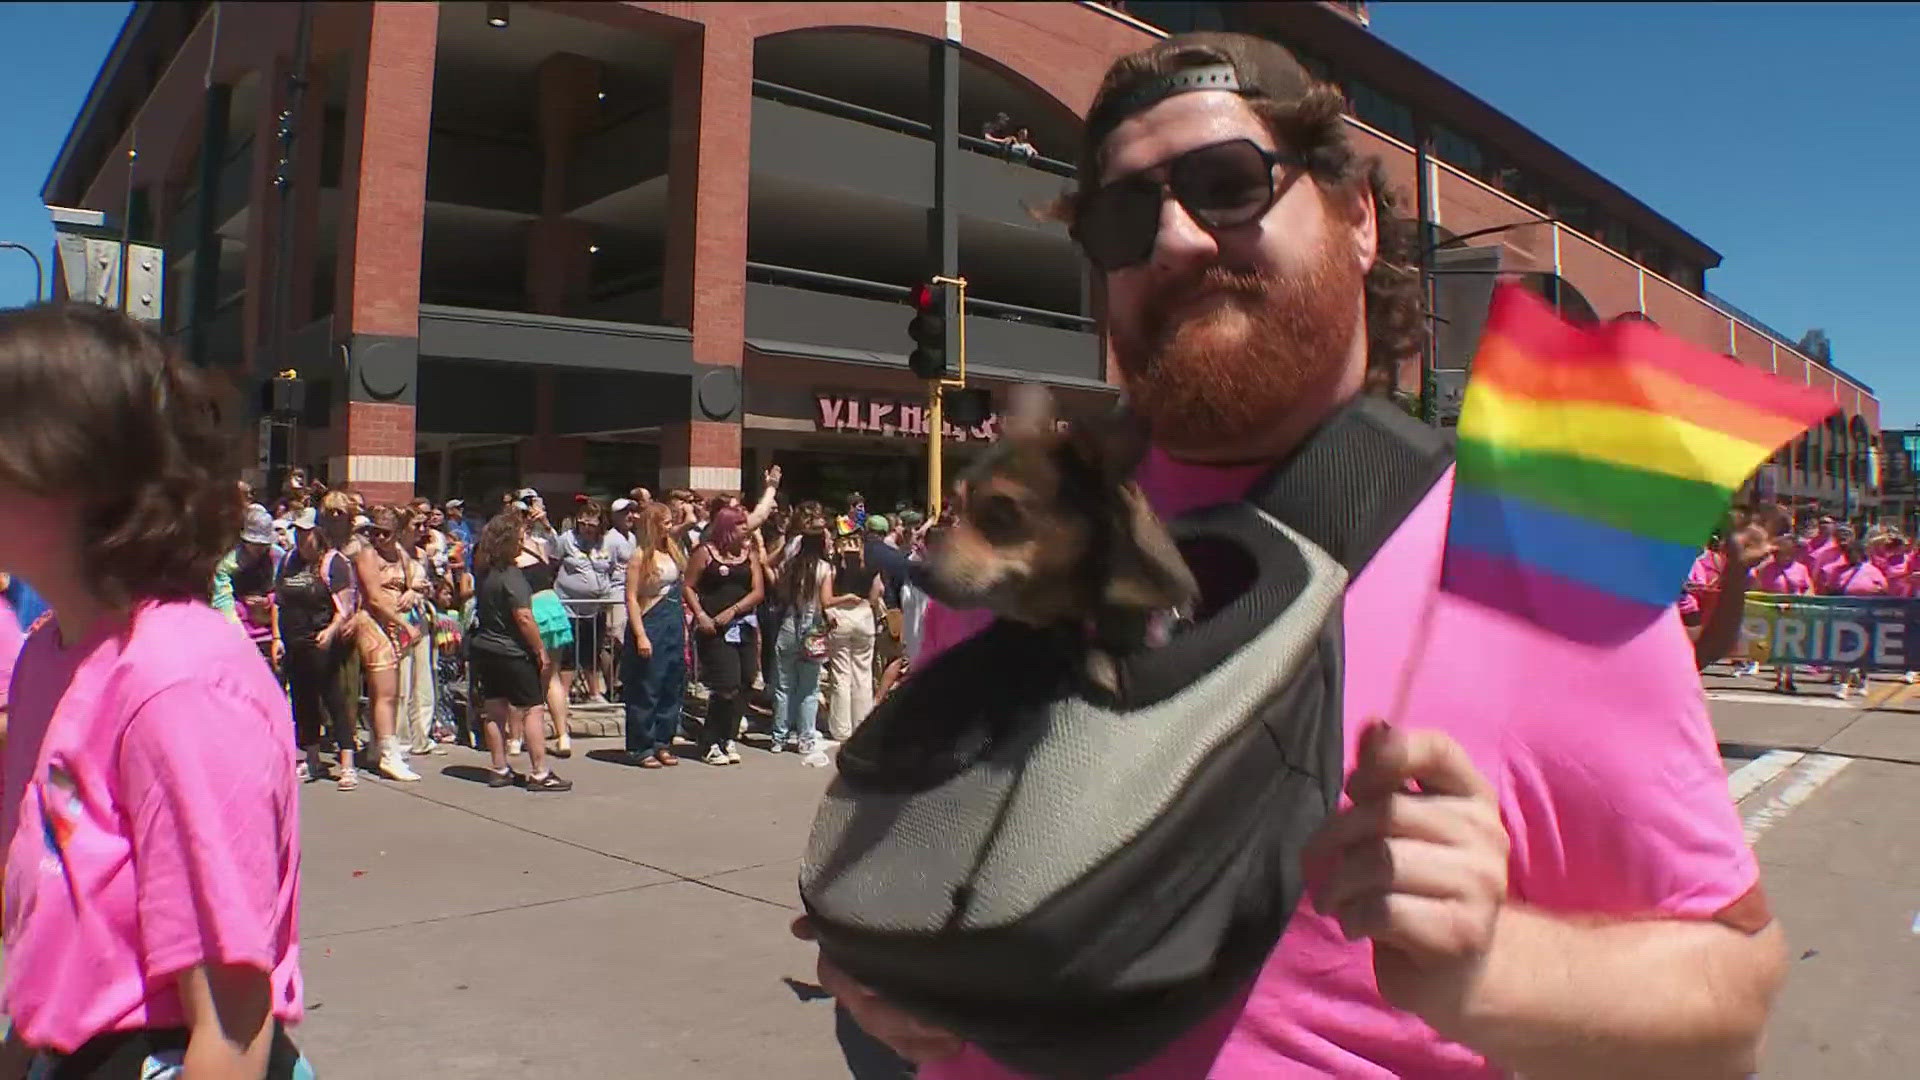 Crowds lined Hennepin Avenue to witness the annual Pride parade, featuring dozens of organizations, companies and politicians showing their support.